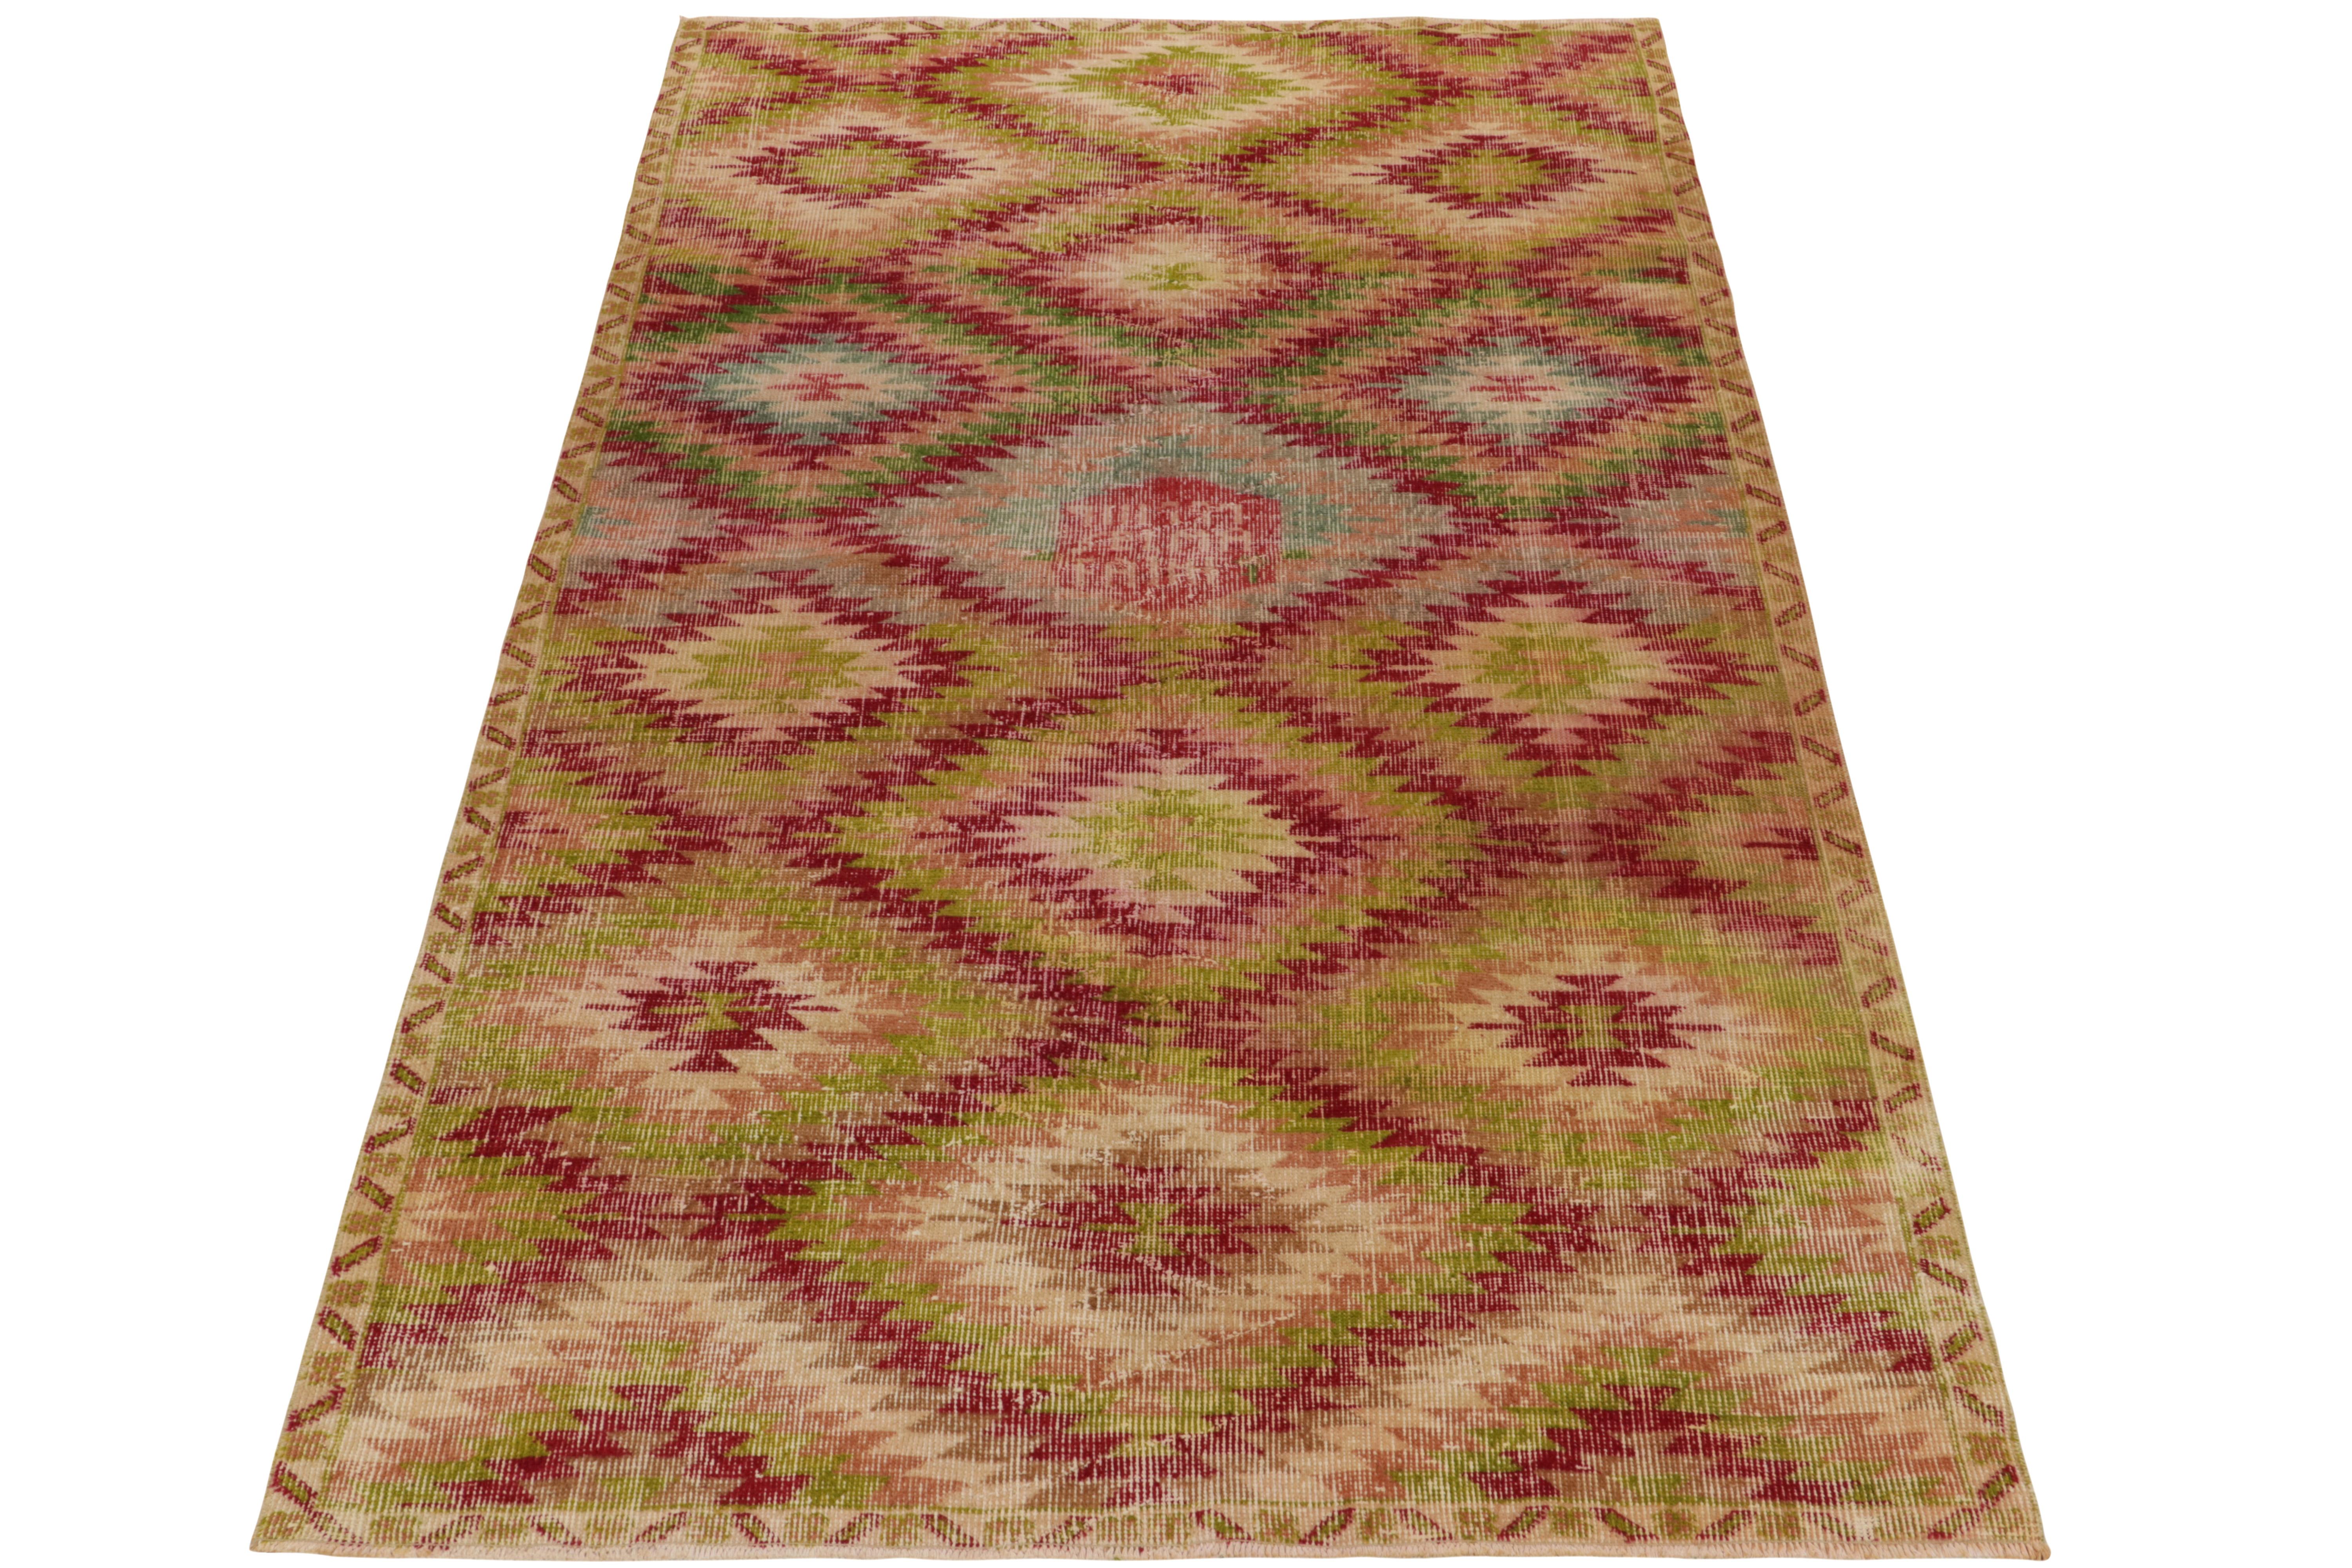 Hand knotted in wool, a 5x9 distressed style rug from our Mid Century Pasha collection connoting the works of a celebrated Turkish designer. Inspired by the Turkish kilims of the 1960s, the rug adapts to a low-sheared pile to imitate distress. The